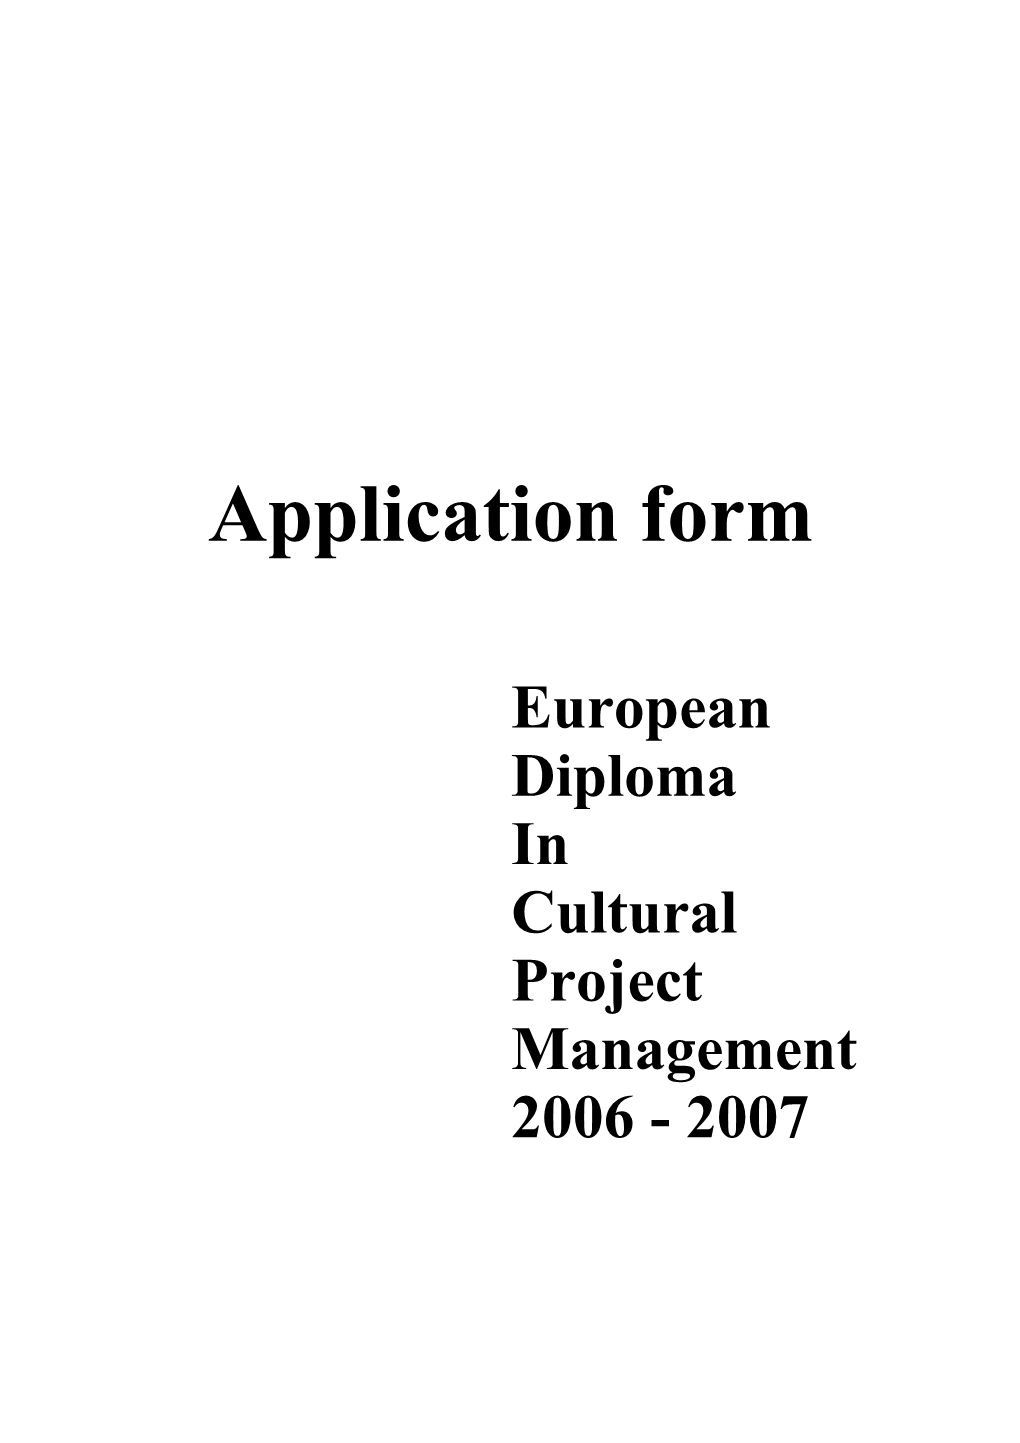 European Diploma in Cultural Project Management